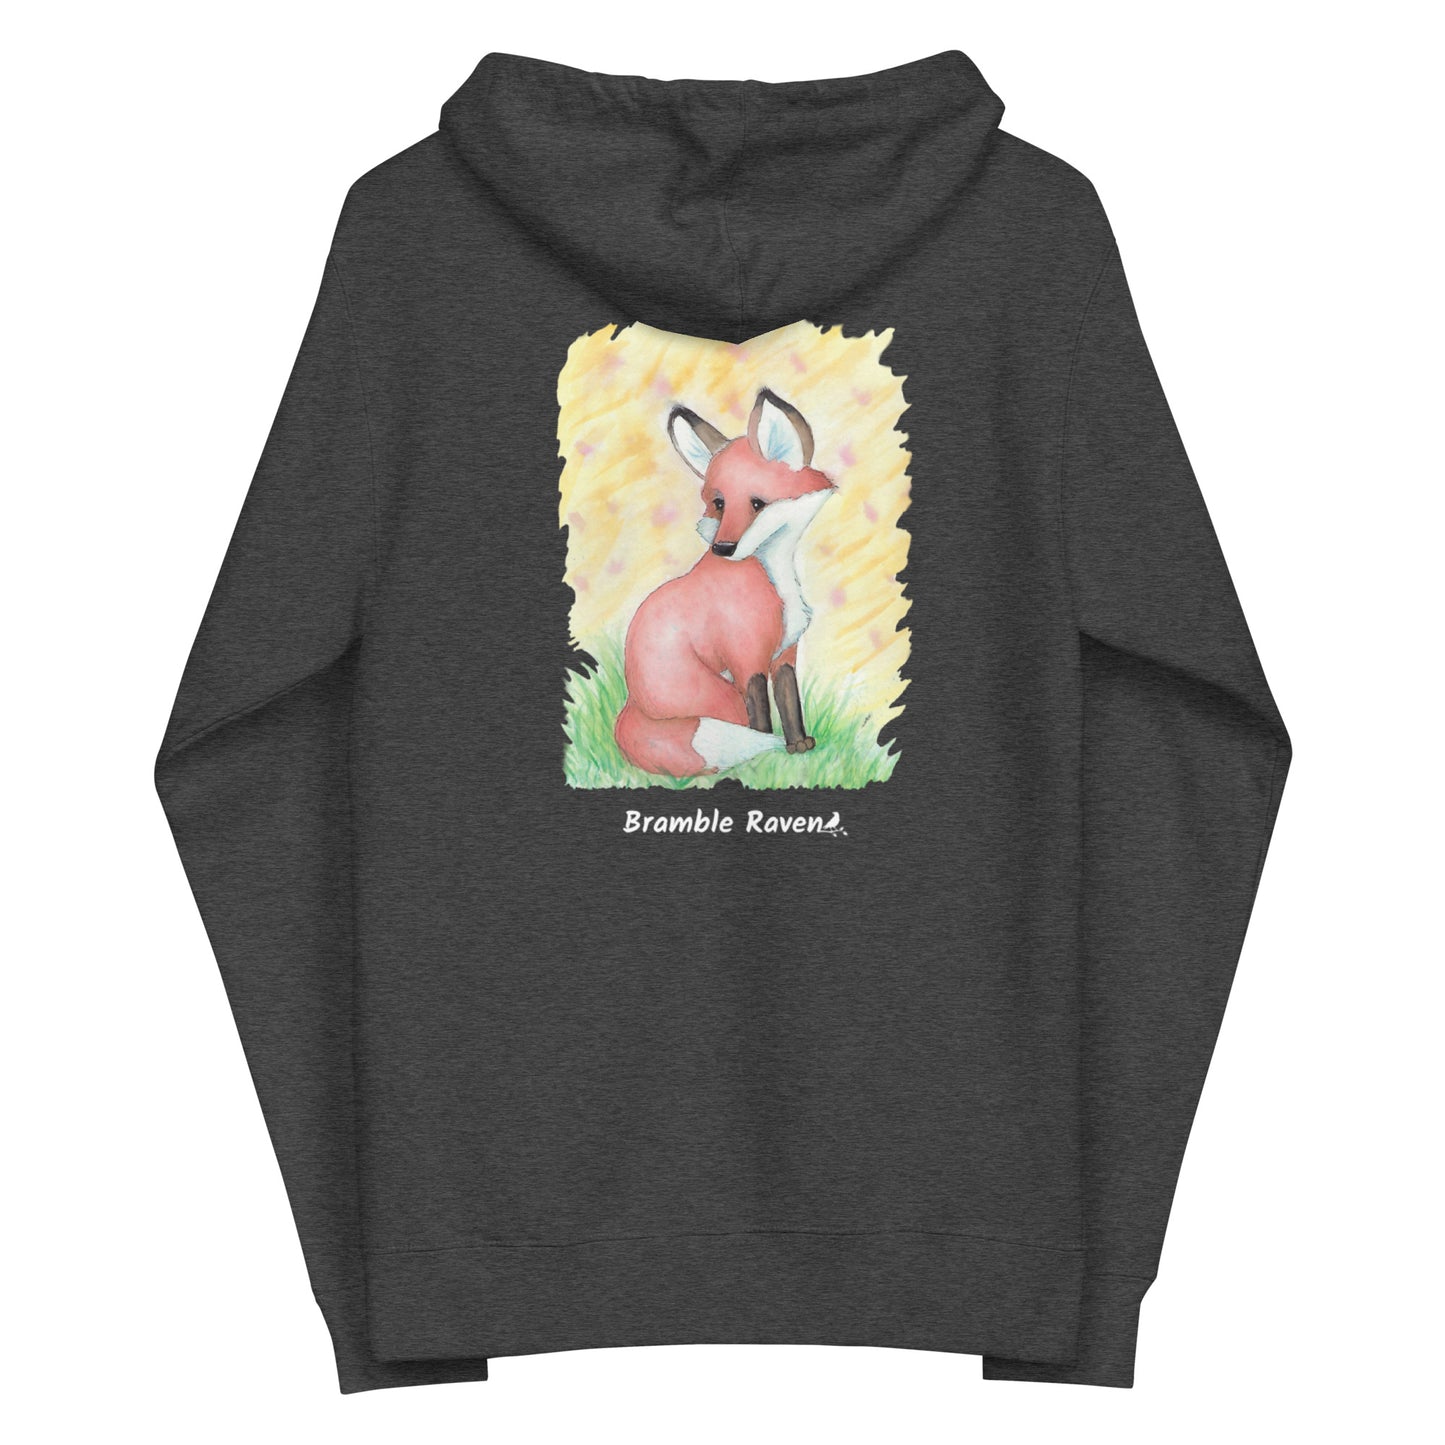 Unisex charcoal heather grey colored zip-up fleece-lined hoodie. Features original watercolor painting of a fox sitting in the grass on the back of the hoodie.